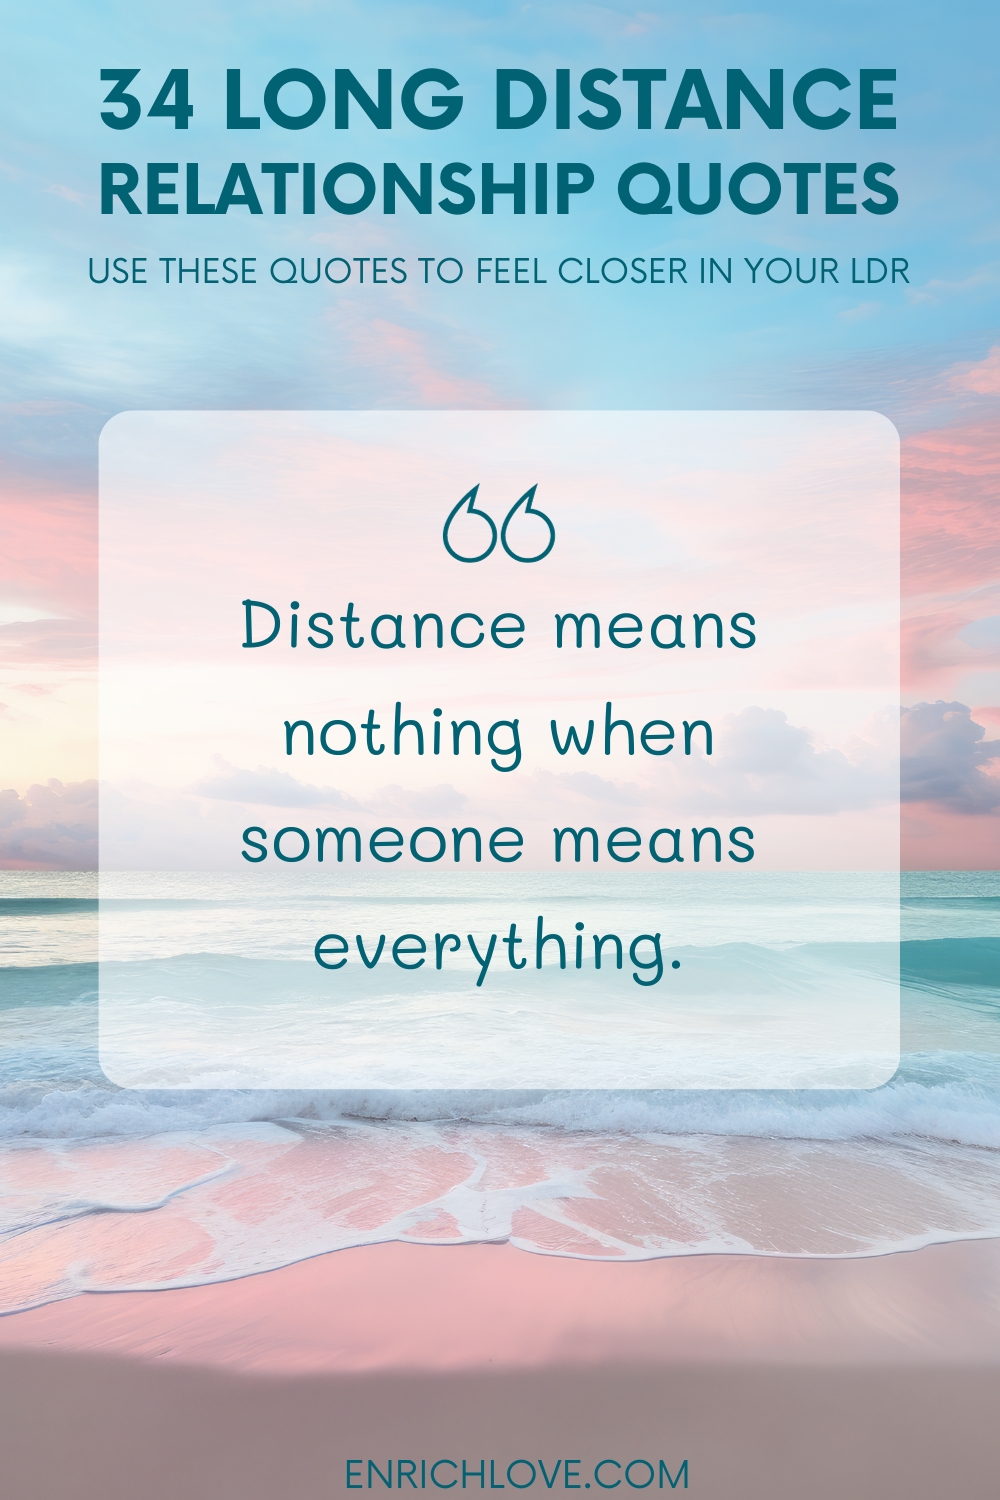 34 Long Distance Relationship Quotes - Distance means nothing when someone means everything.